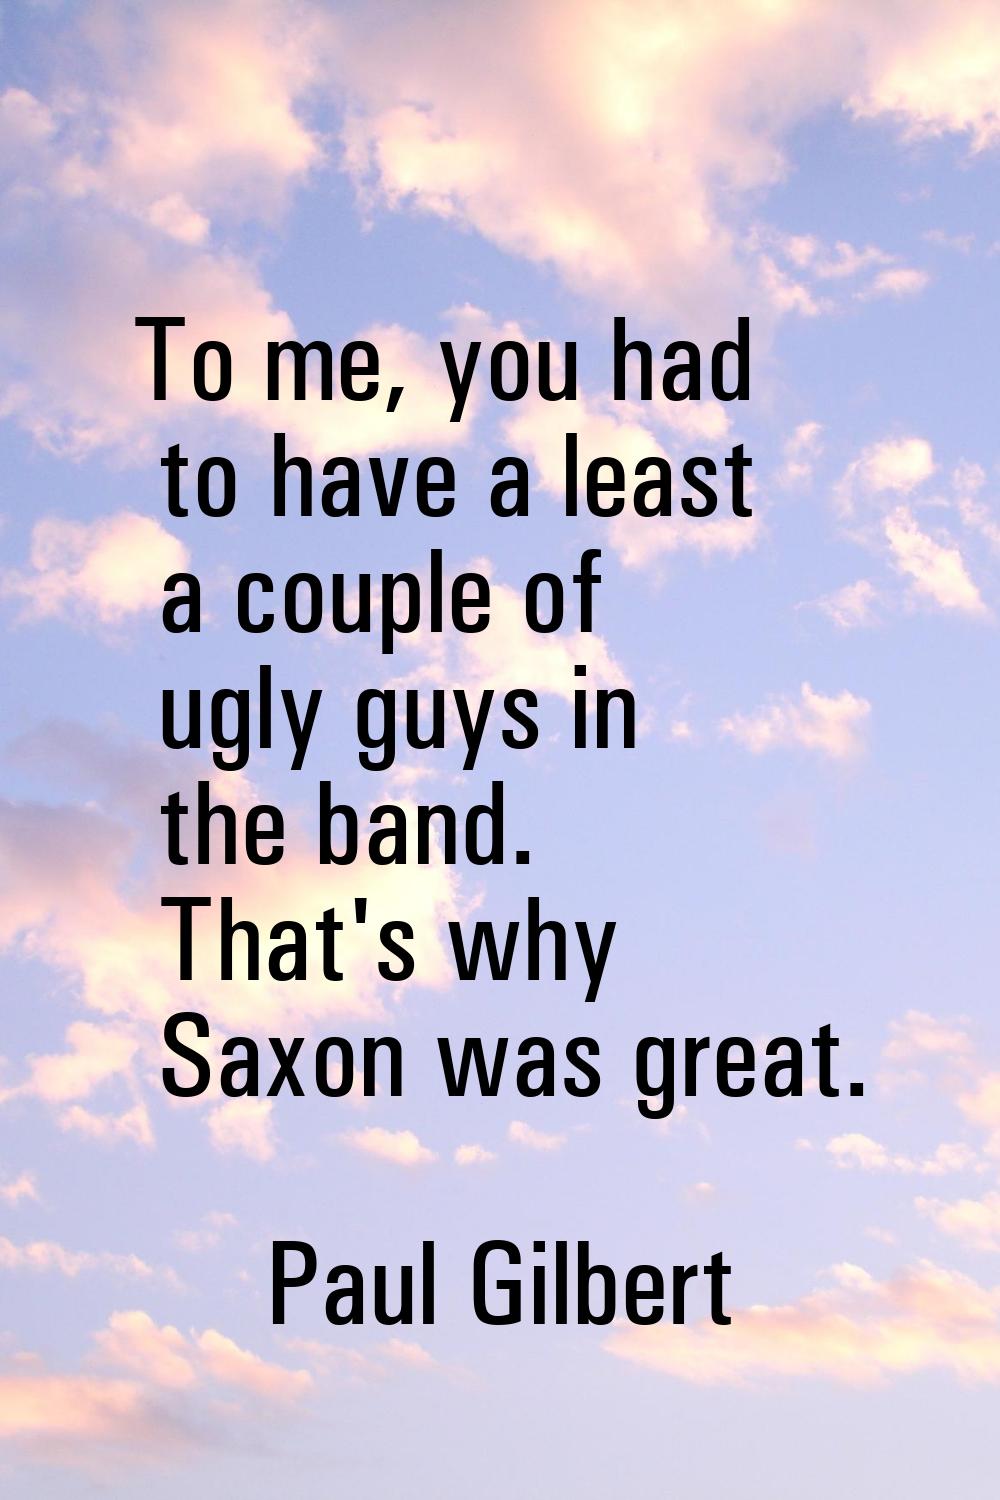 To me, you had to have a least a couple of ugly guys in the band. That's why Saxon was great.